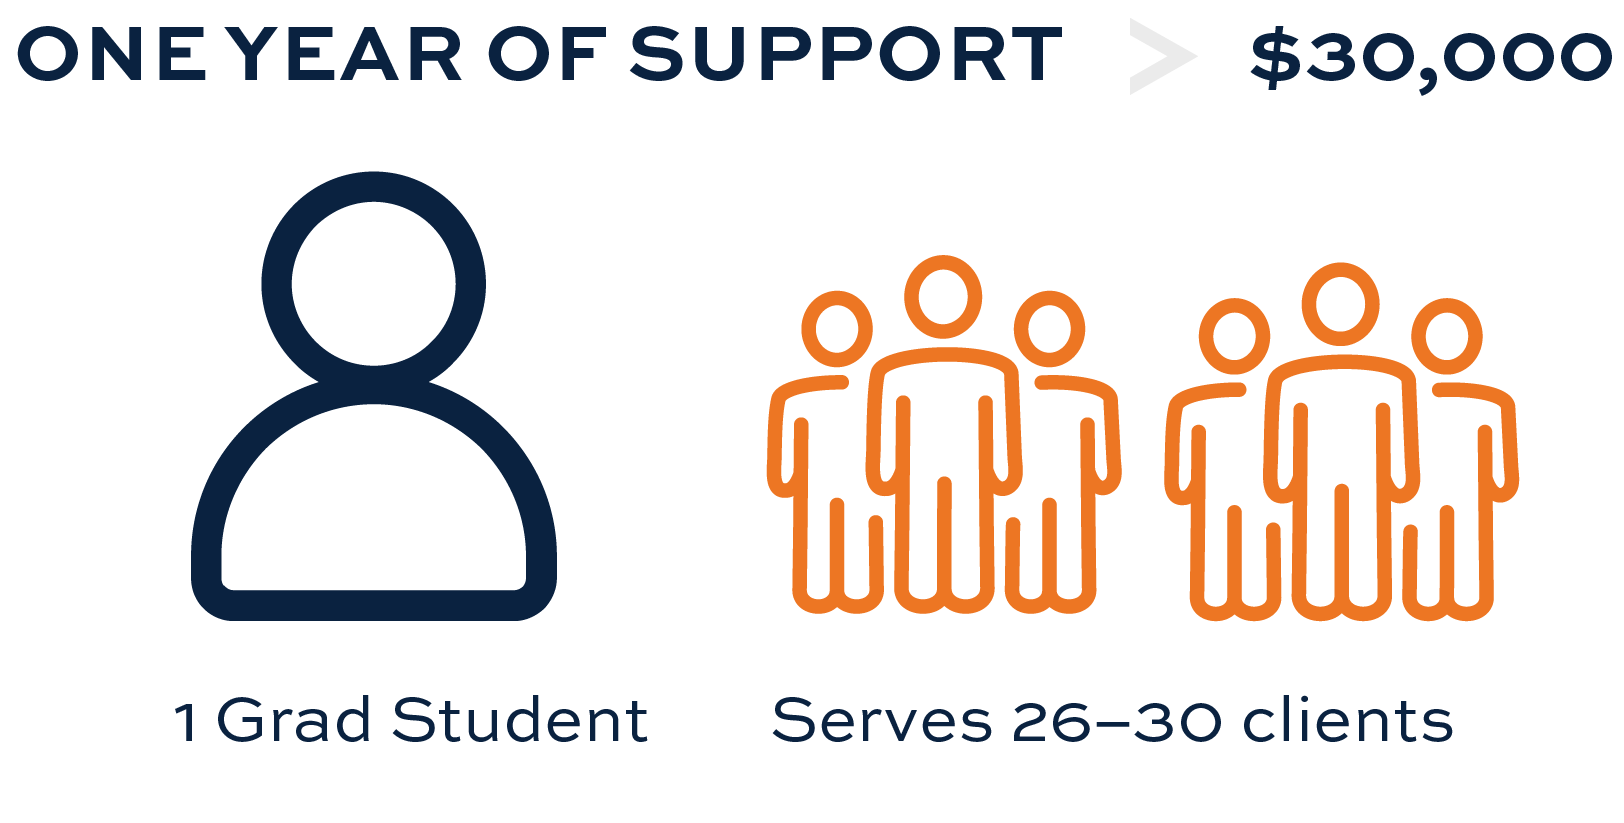 Inforgraphic depicting one year of support at 30000 dollars translates to 1 grad student and serves 26 to 30 clients